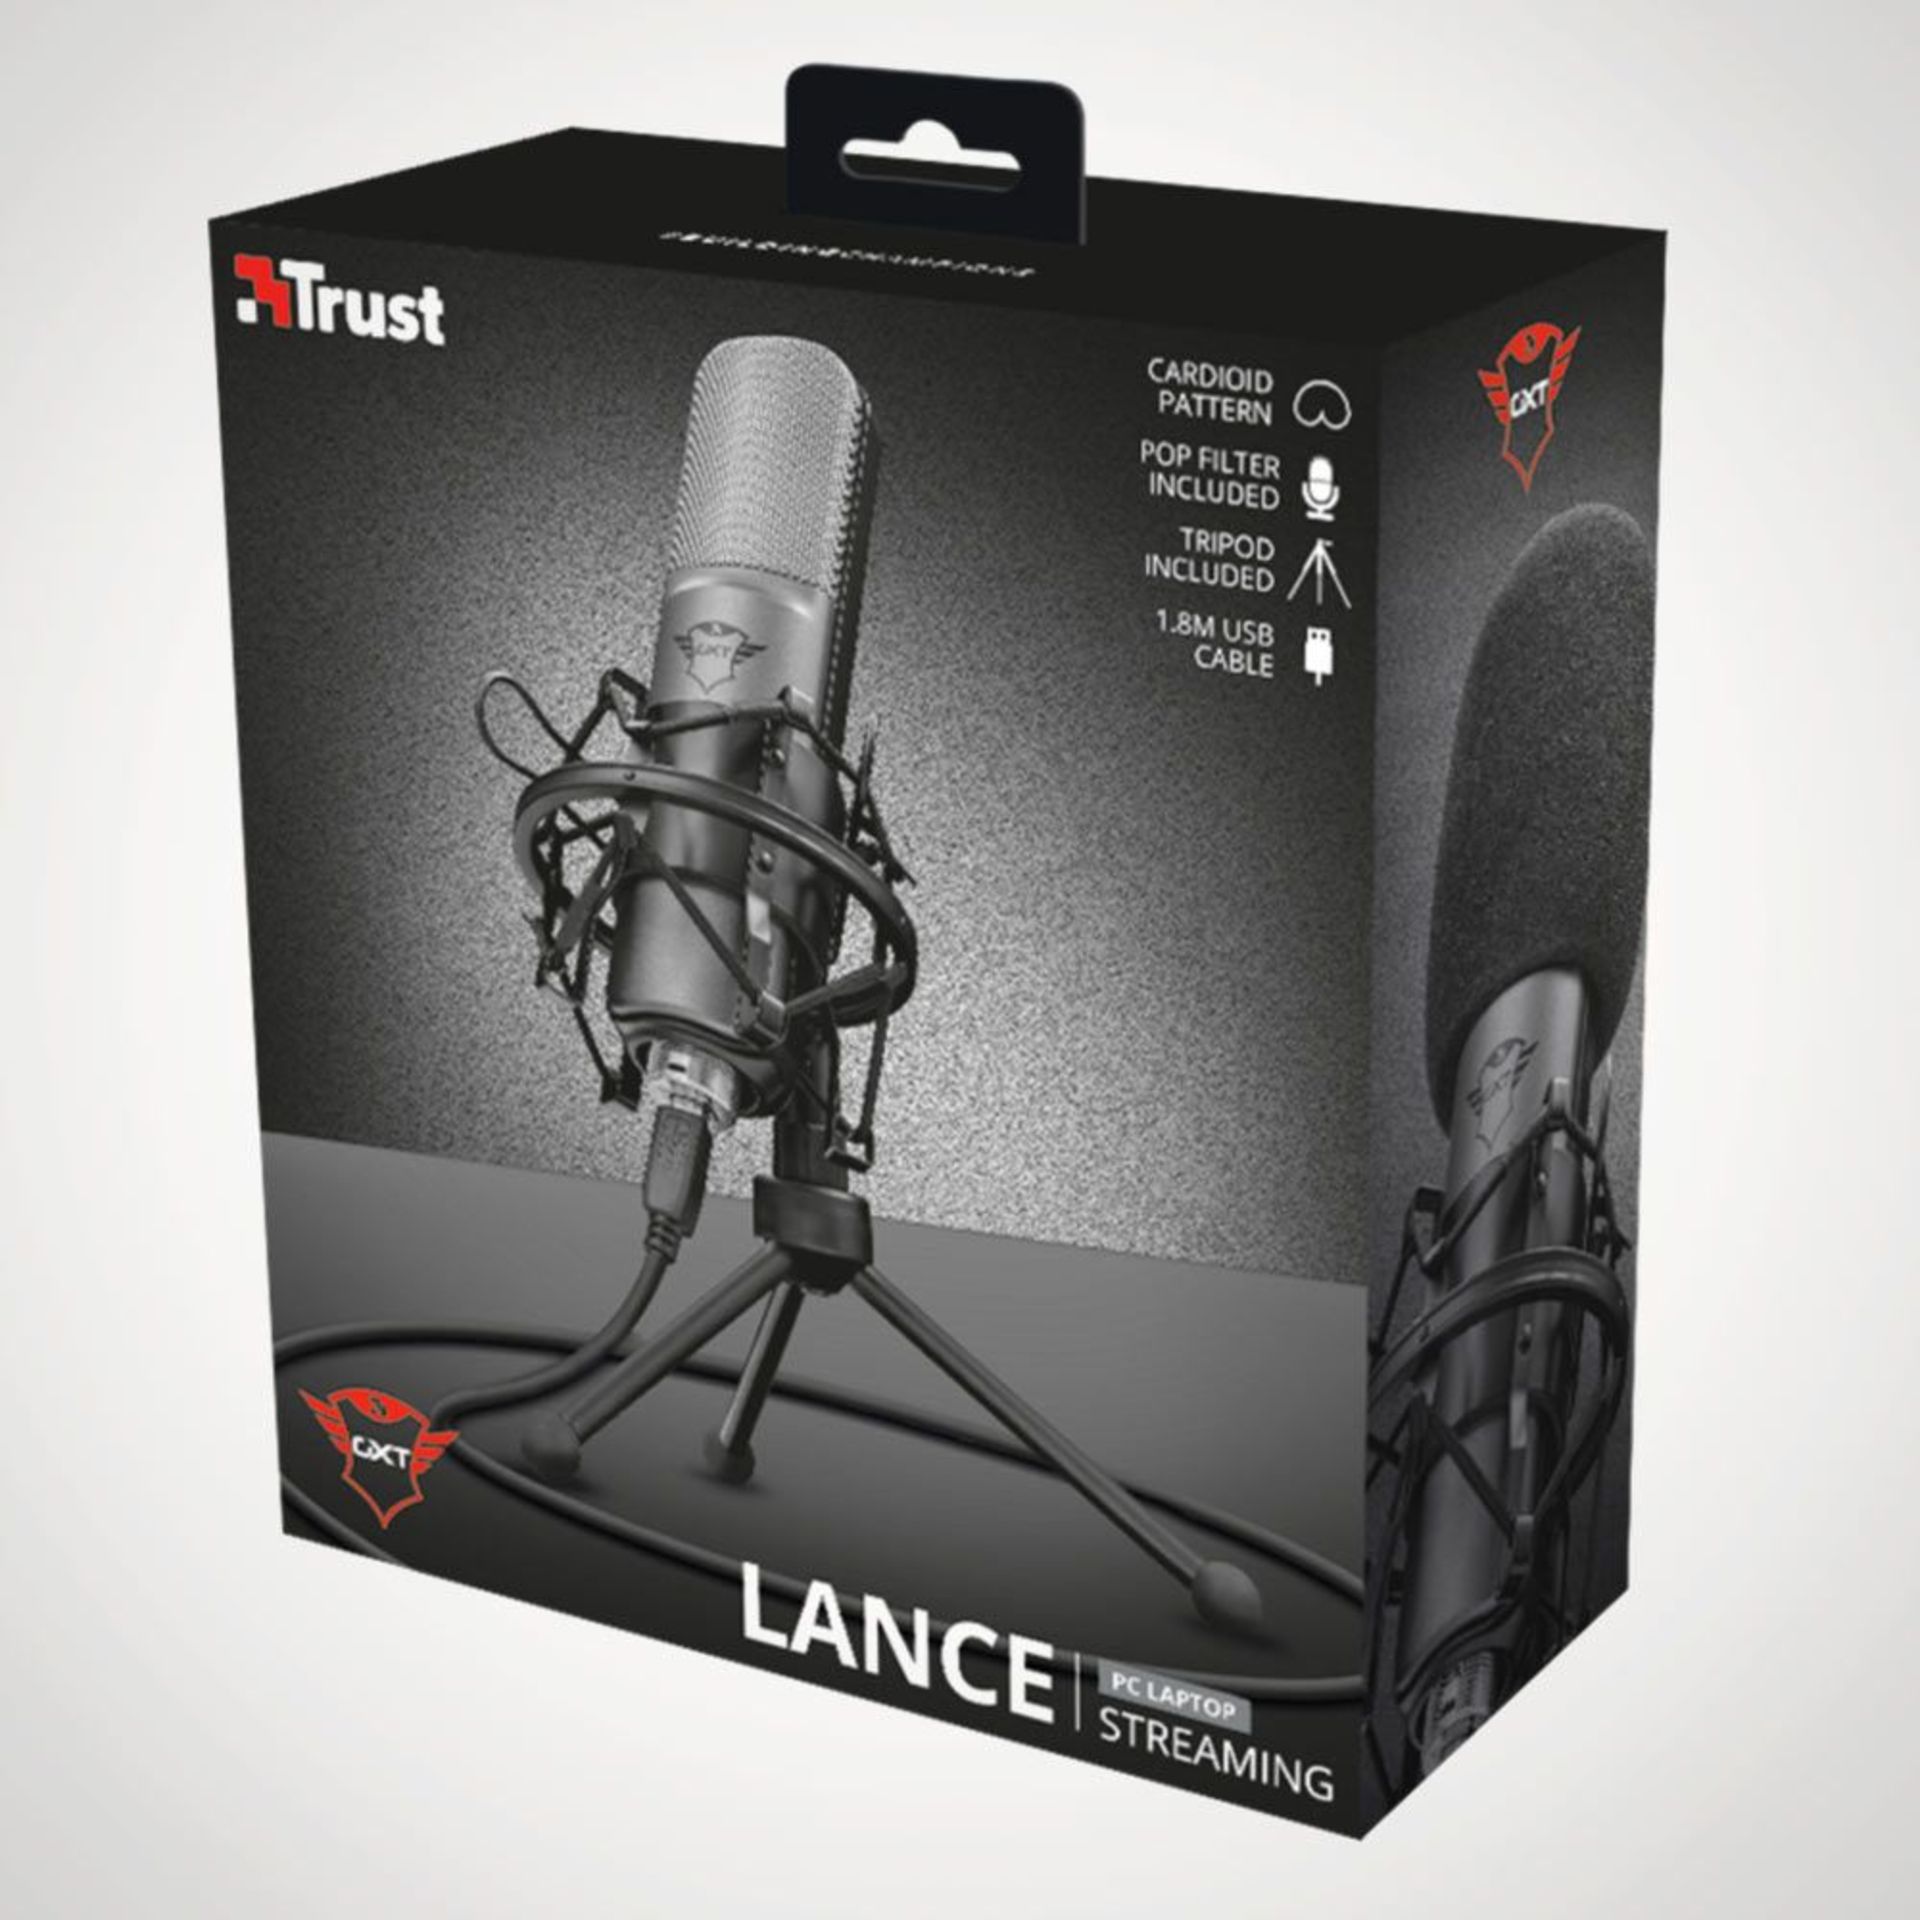 (P2) 3x Trust GXT 242 Lance PC/Console Streaming USB Microphone RRP £59.99 Each. (Units Have Retur - Image 2 of 3